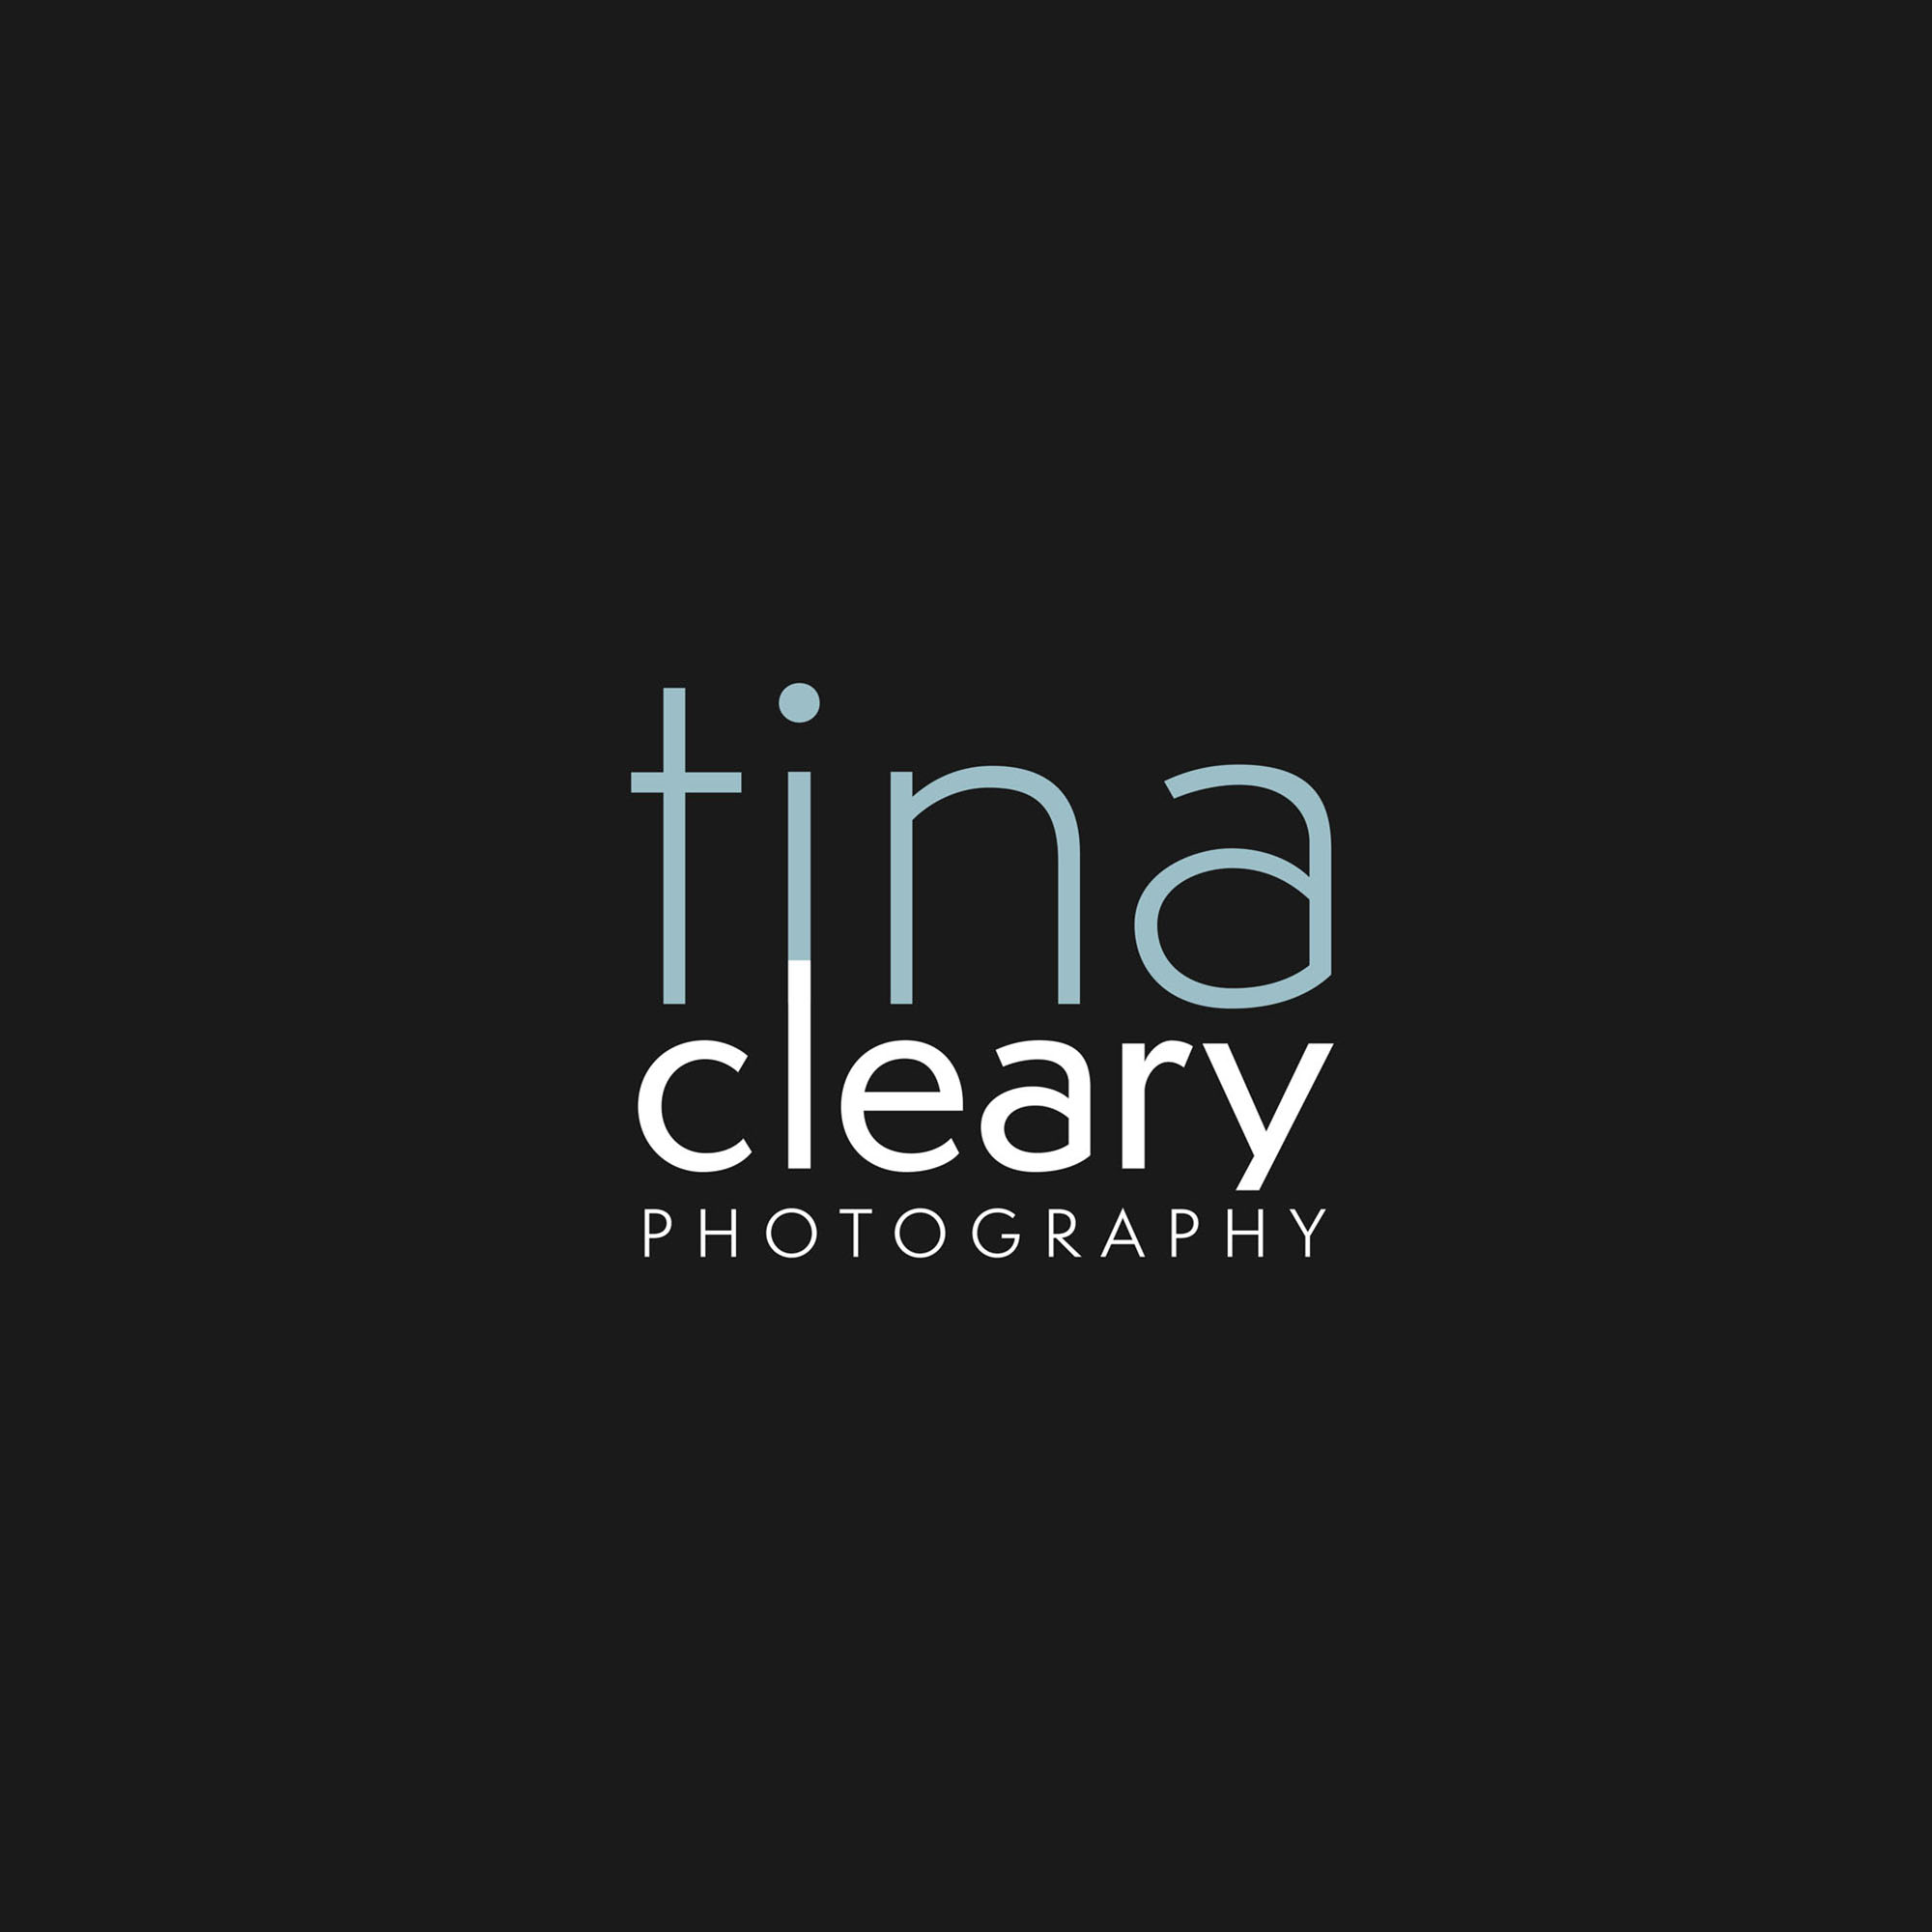 Tina Cleary Photography Branding